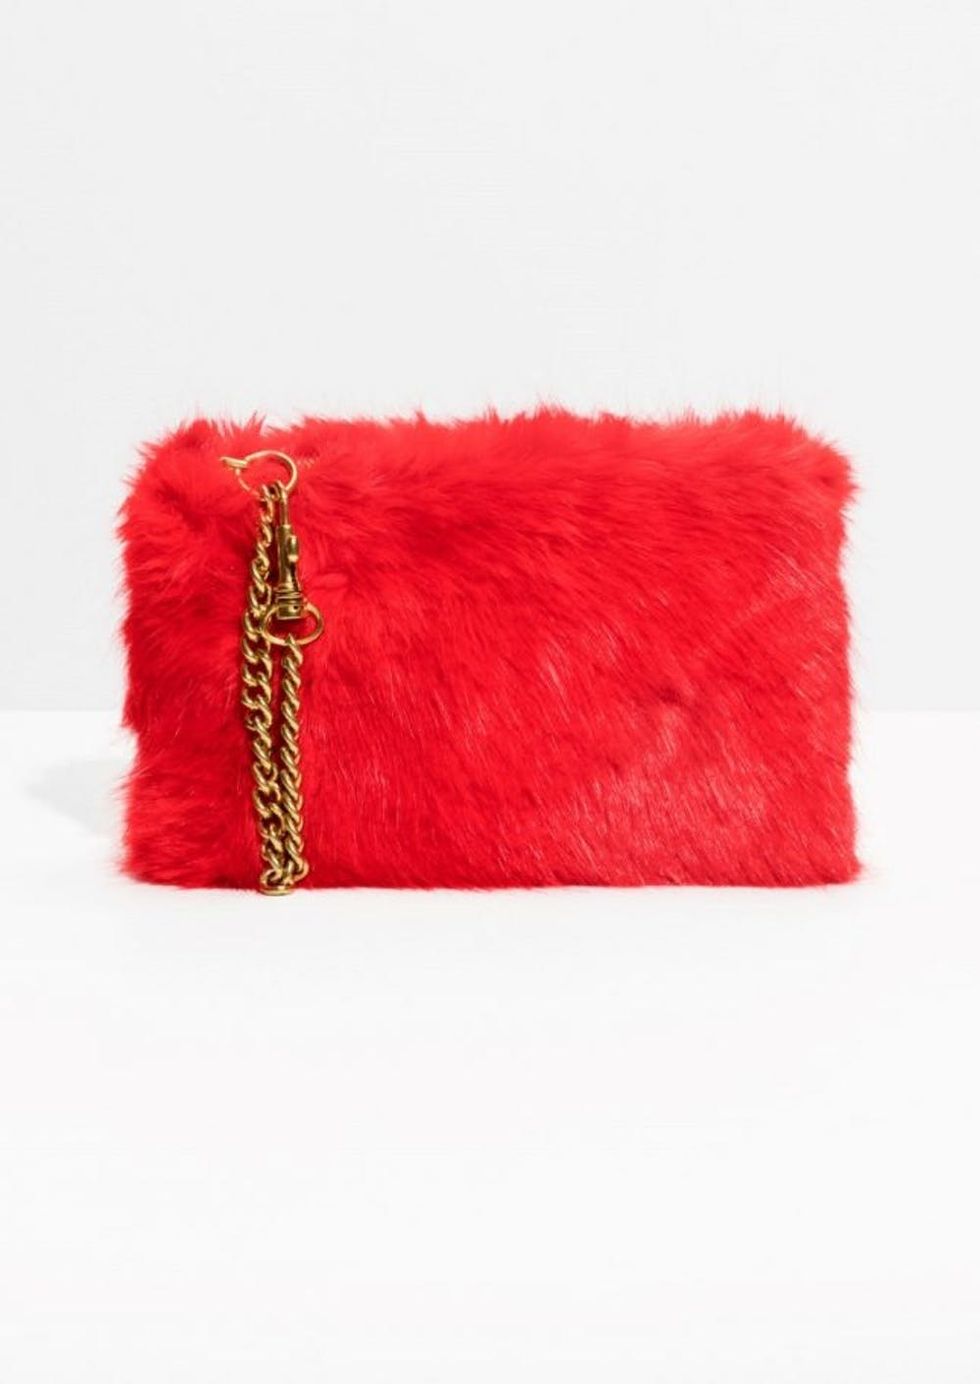 12 Wristlet Bags You Need for an Effortless (and Hands-Free) Holiday ...